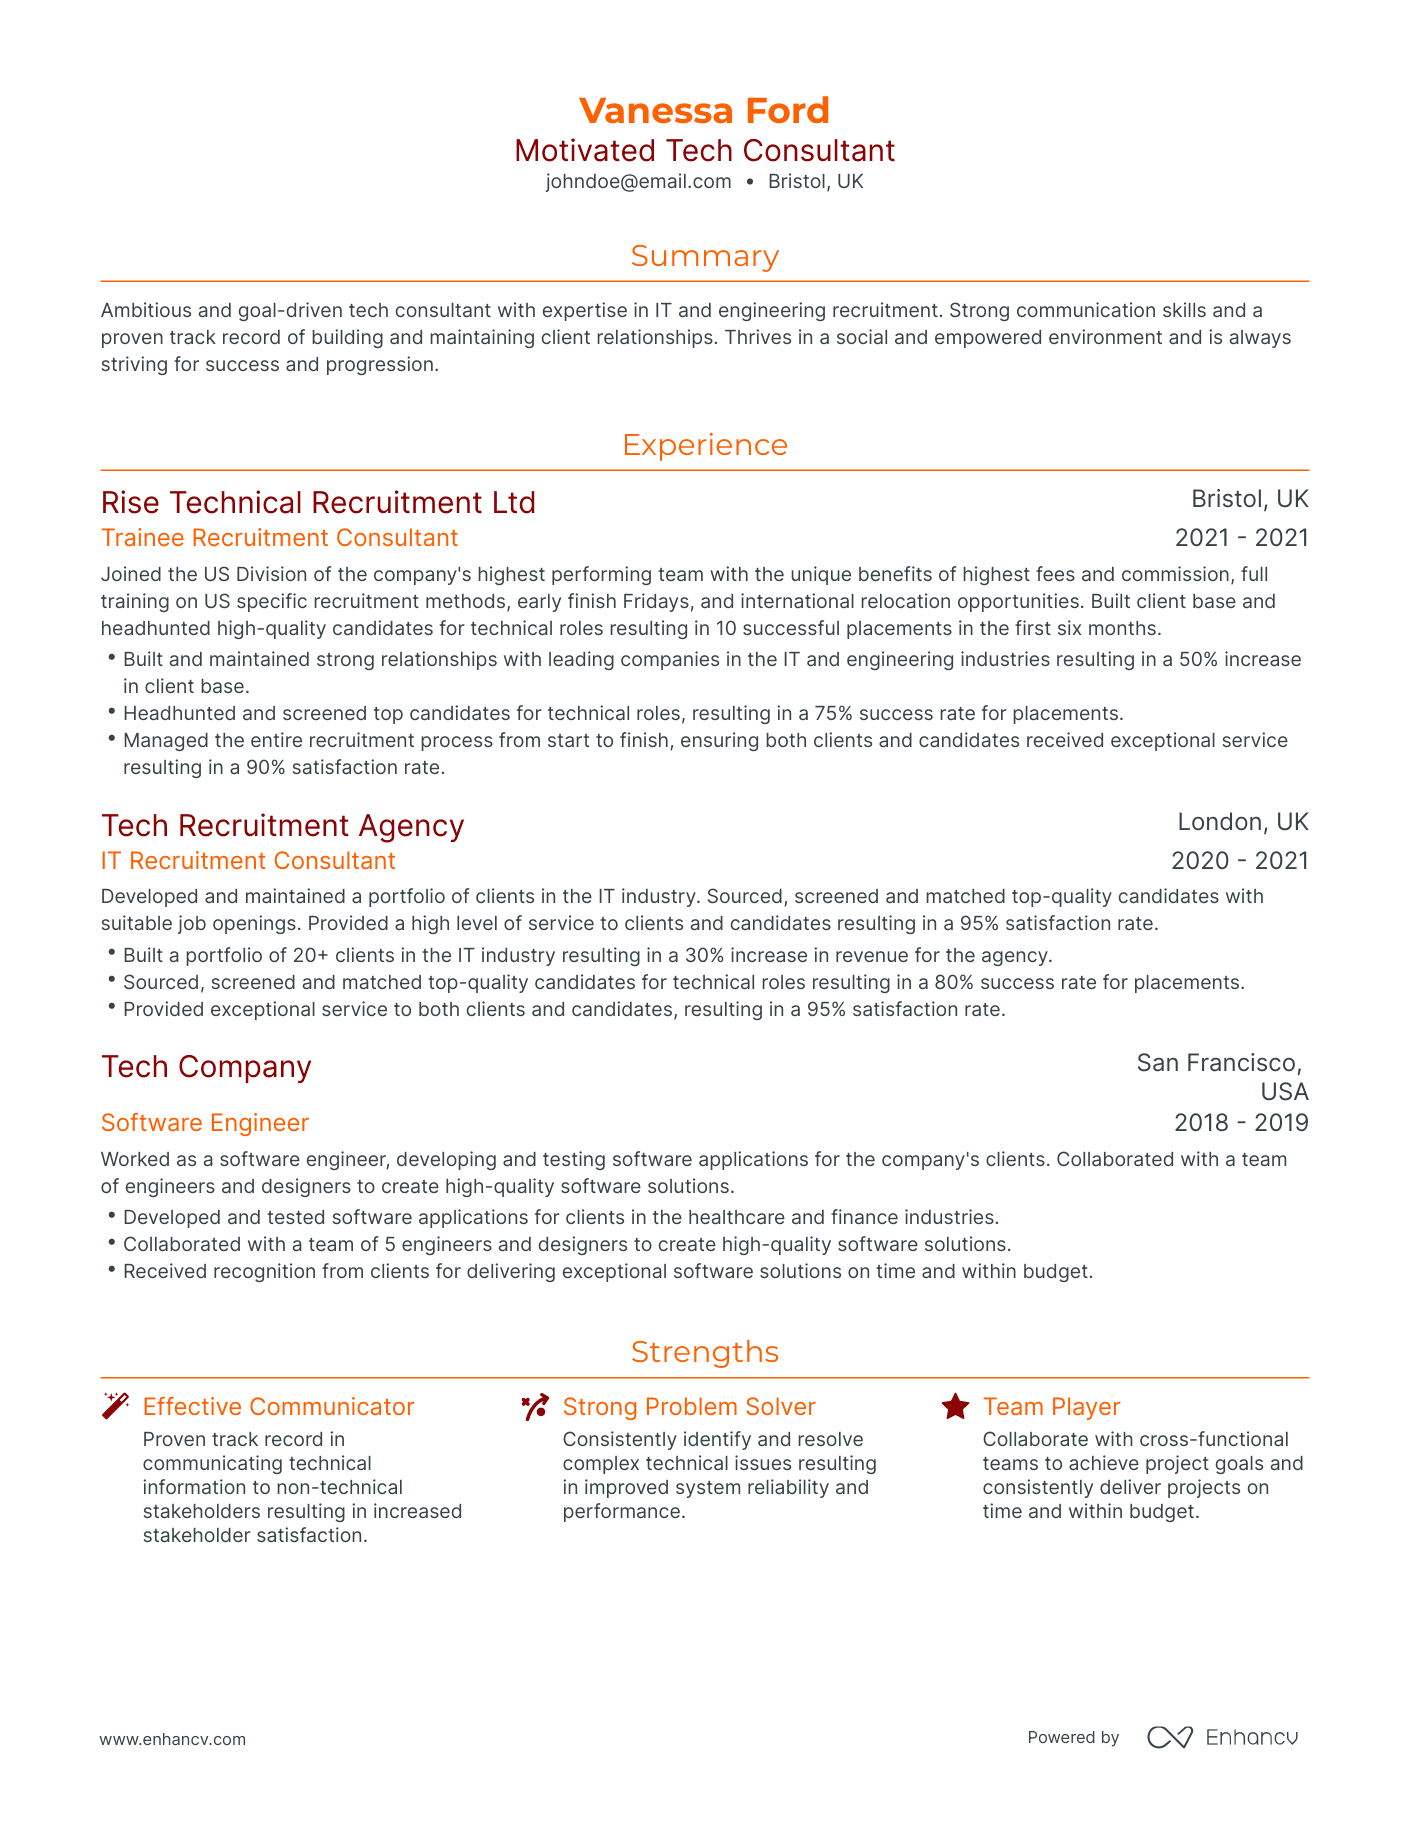 Traditional Tech Consultant Resume Template